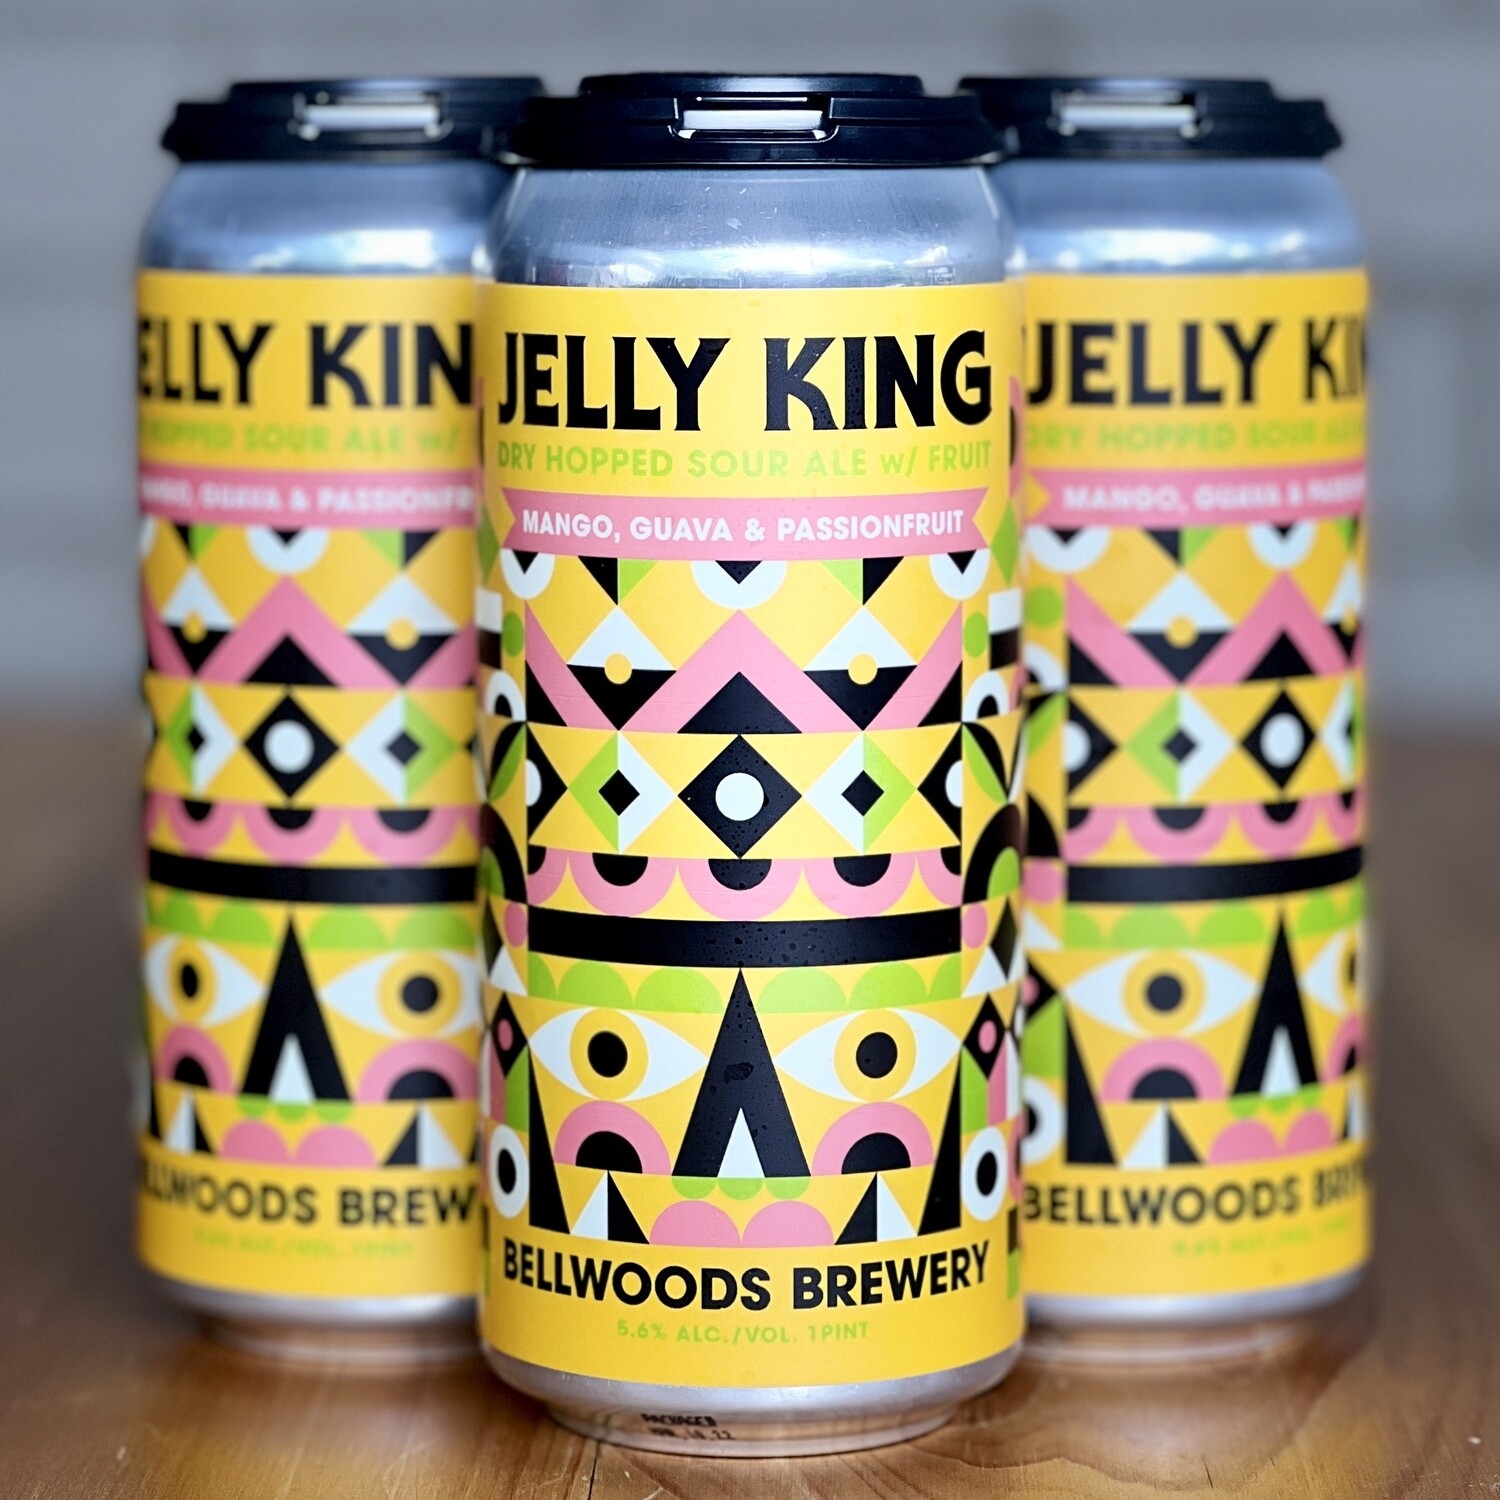 Bellwoods Brewery Jelly King [Mango, Guava & Passionfruit] (4pk)